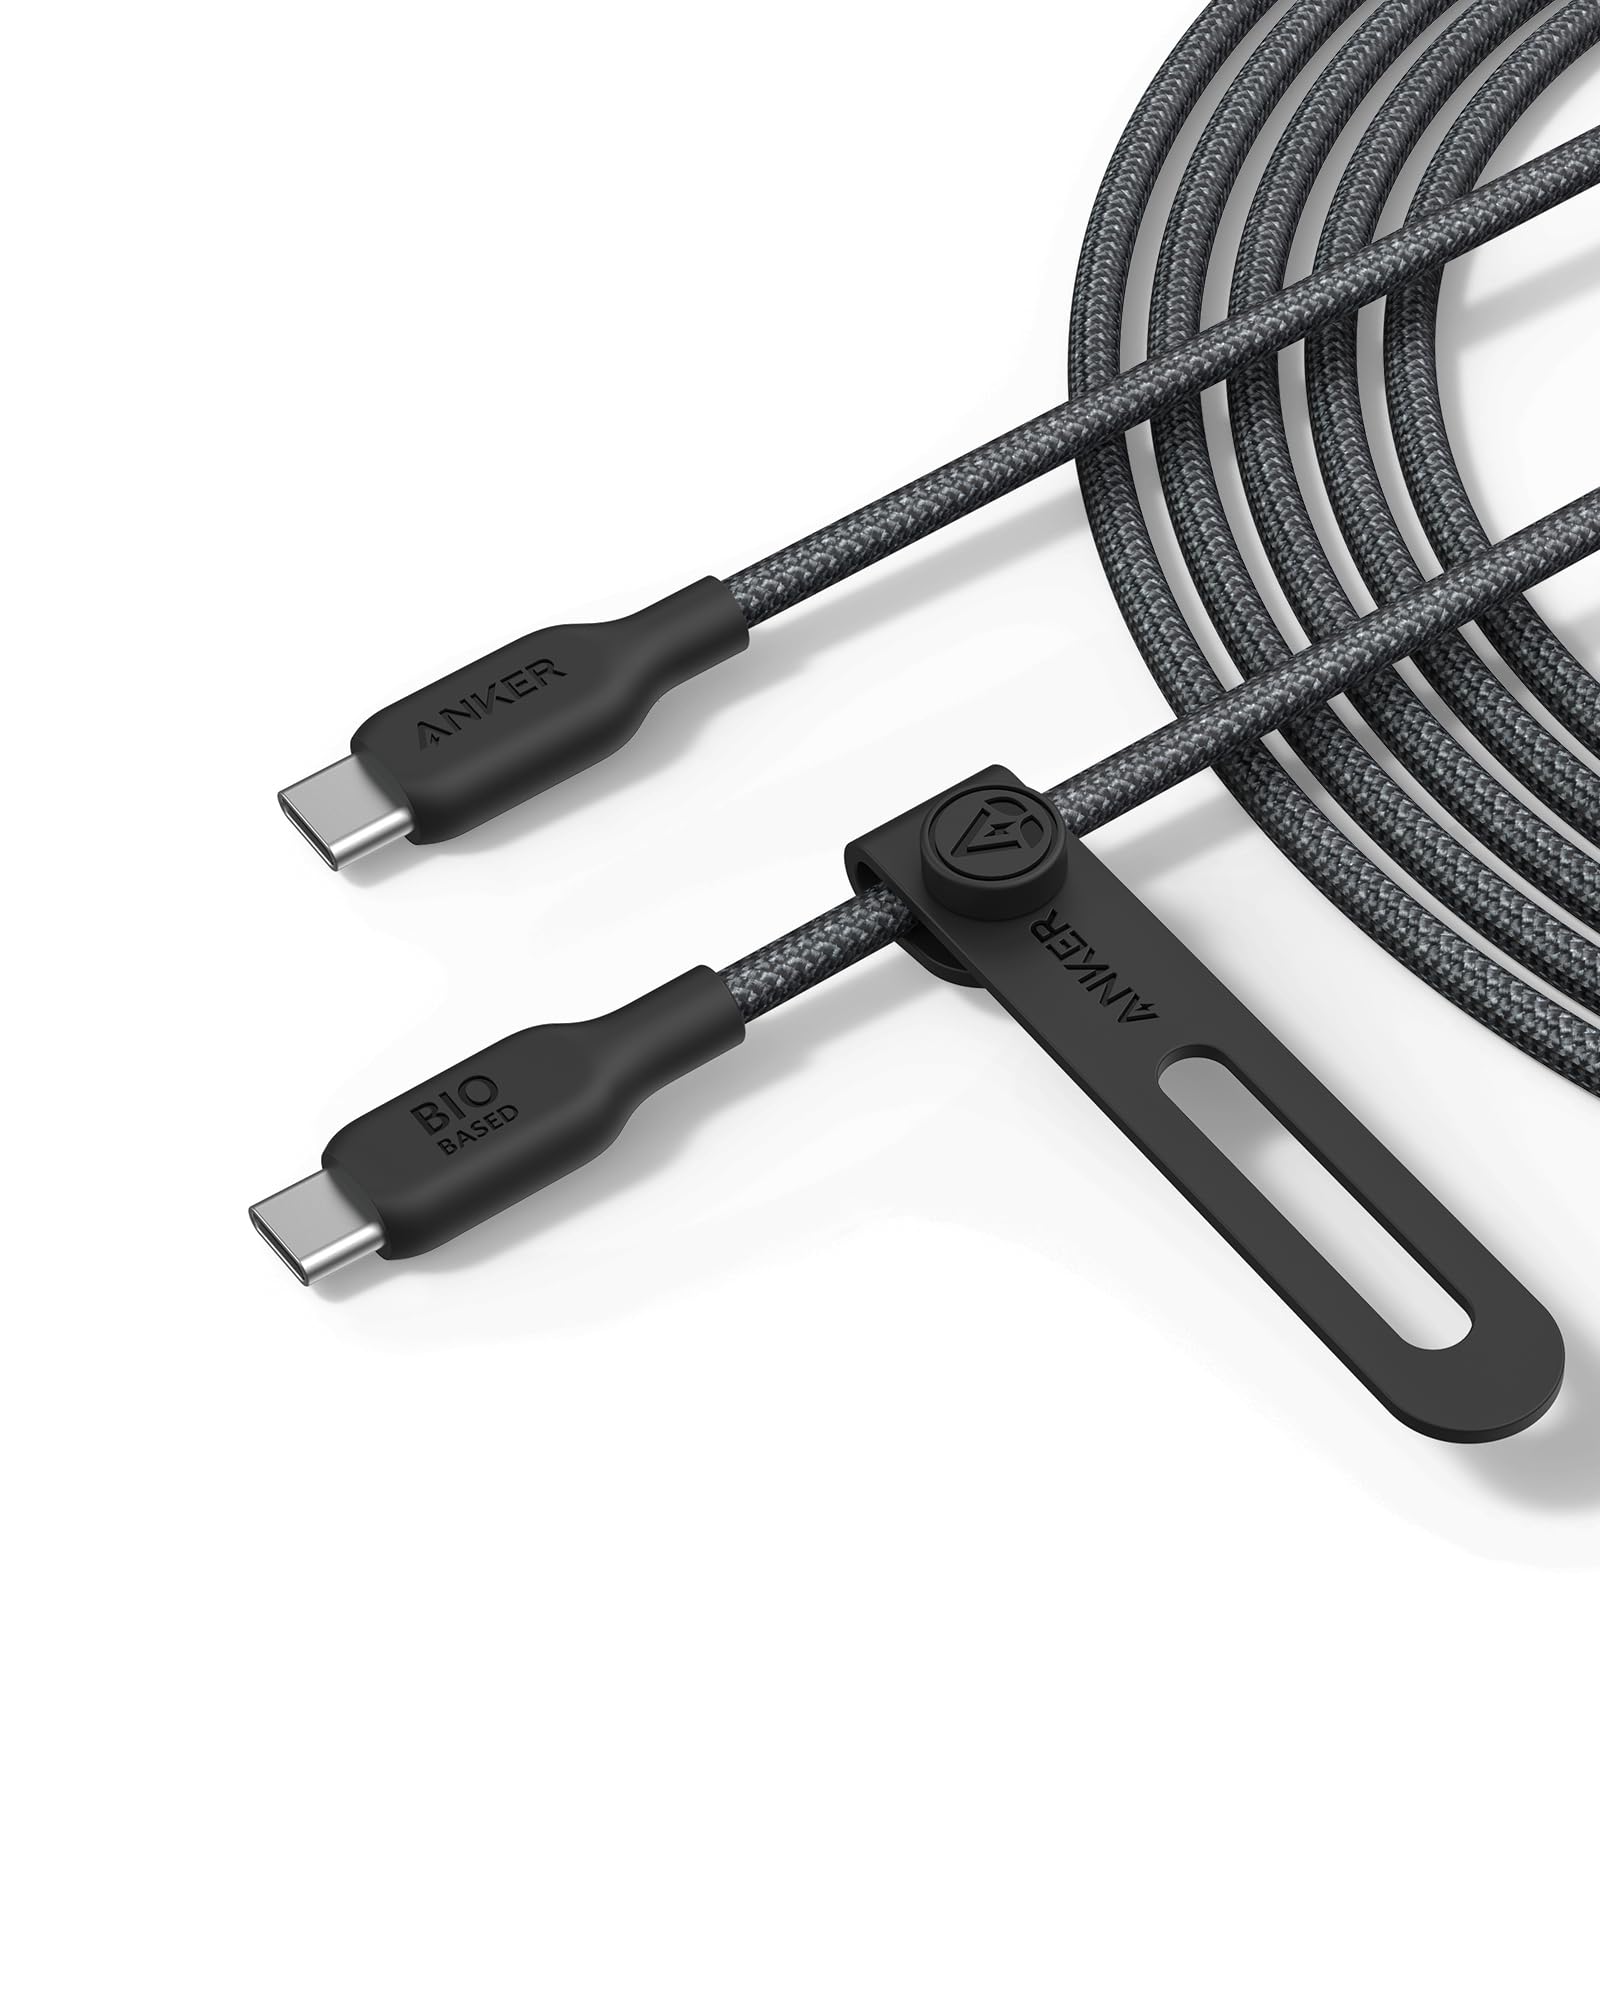 Anker 543 USB C to USB C Cable (240W, 10ft) - Anker US